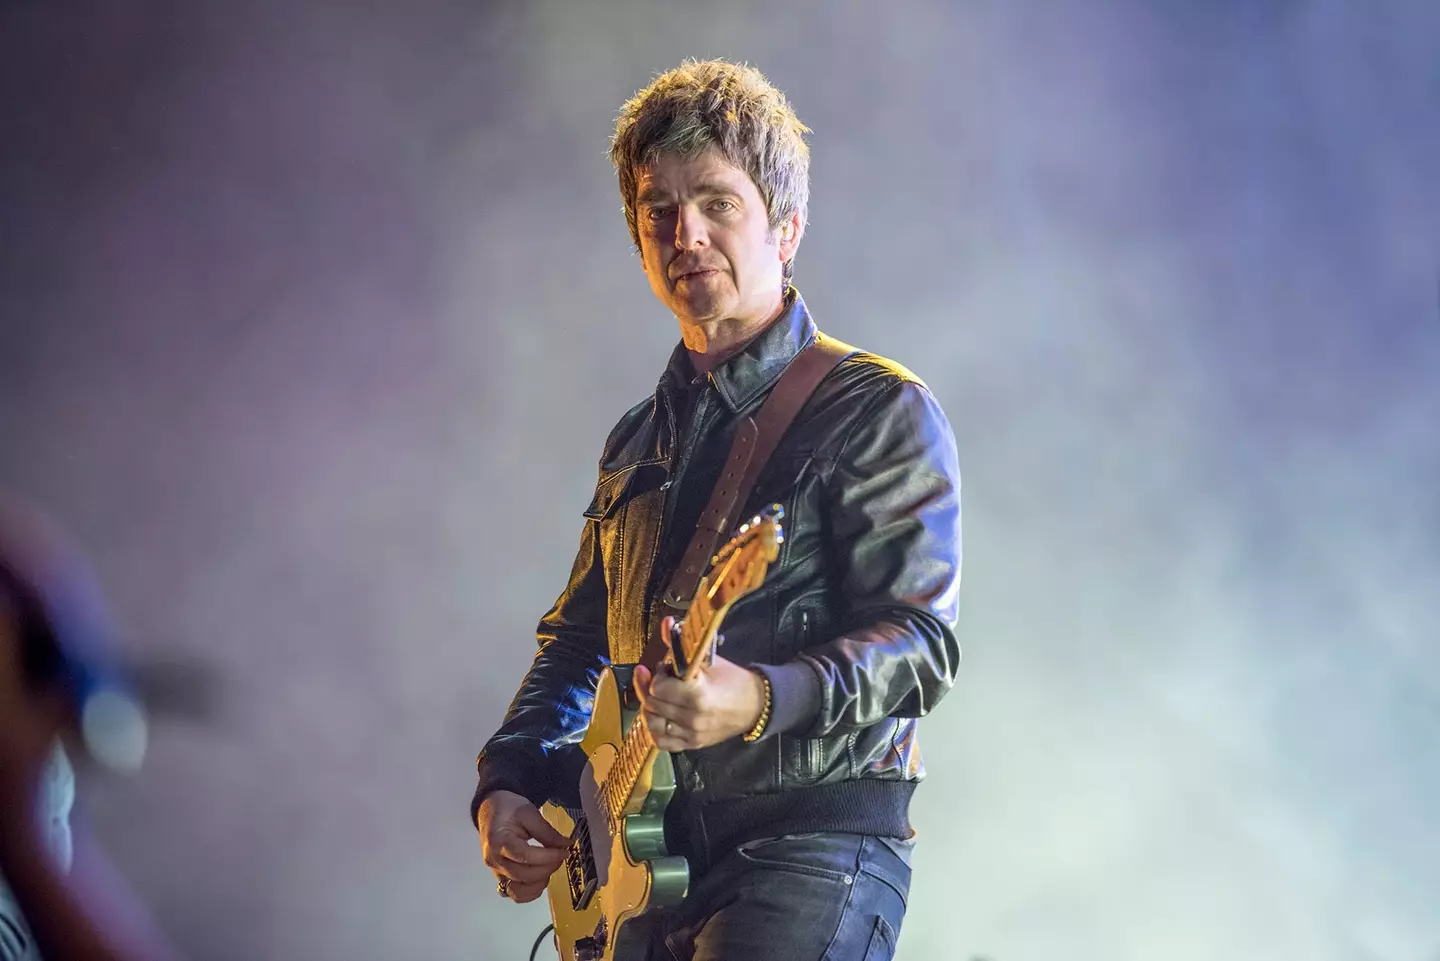 Noel Gallagher has been enjoying a holiday with his wife, Sara.